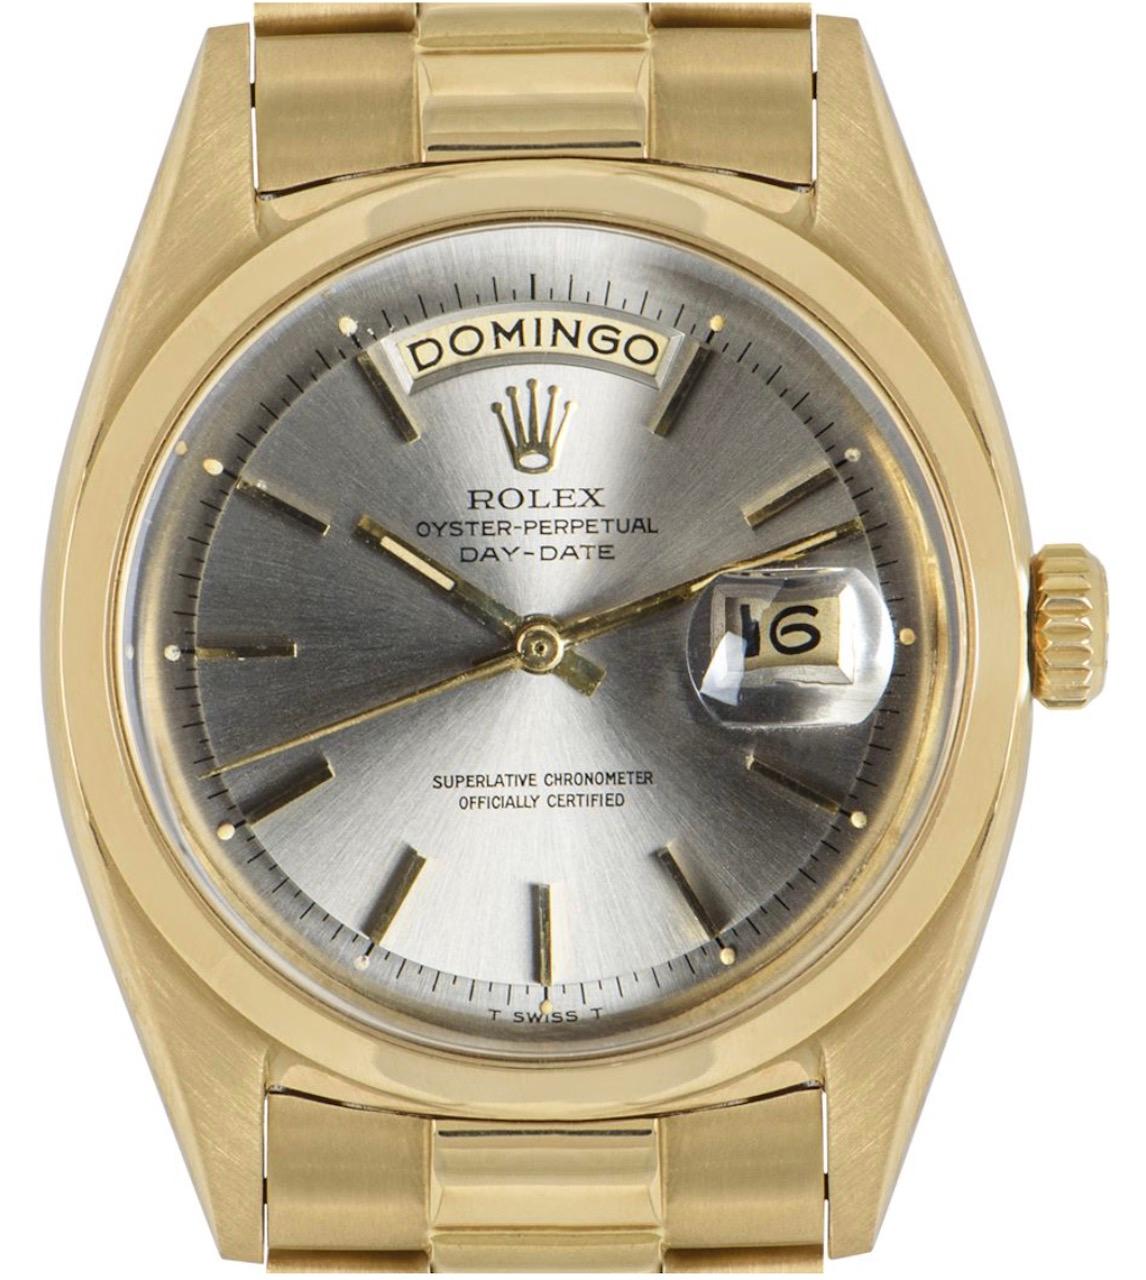 An 18k yellow gold Oyster Perpetual Day-Date vintage wristwatch. Features a silver dial with applied hour markers, a date aperture, and a day display. Complementing the dial is a fixed 18k yellow gold smooth bezel. 

Equipped with an 18k yellow gold